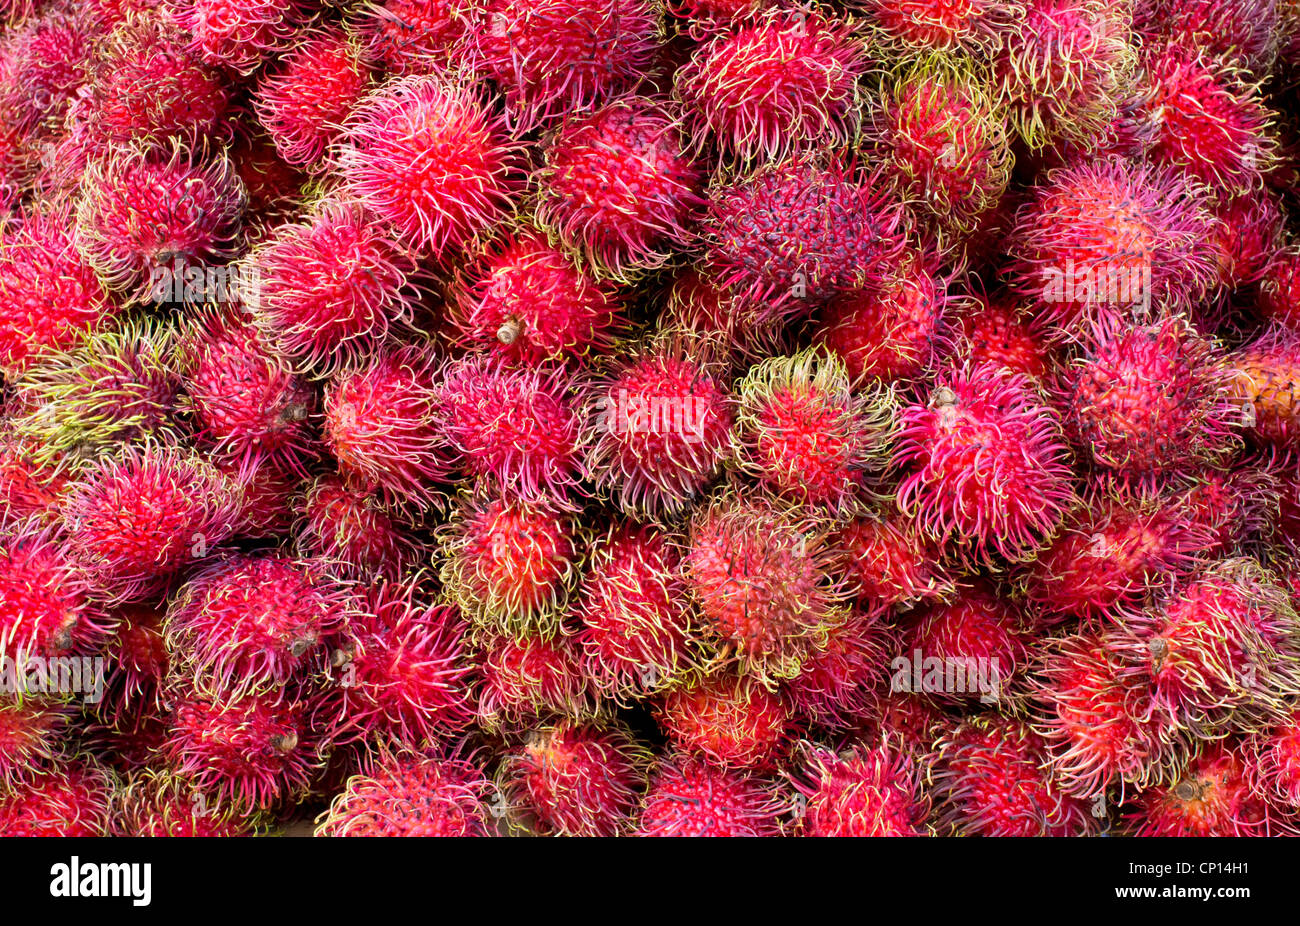 Rambutan, a Southeast Asian sweet fruit in a Chinatown produce market in New York City Stock Photo